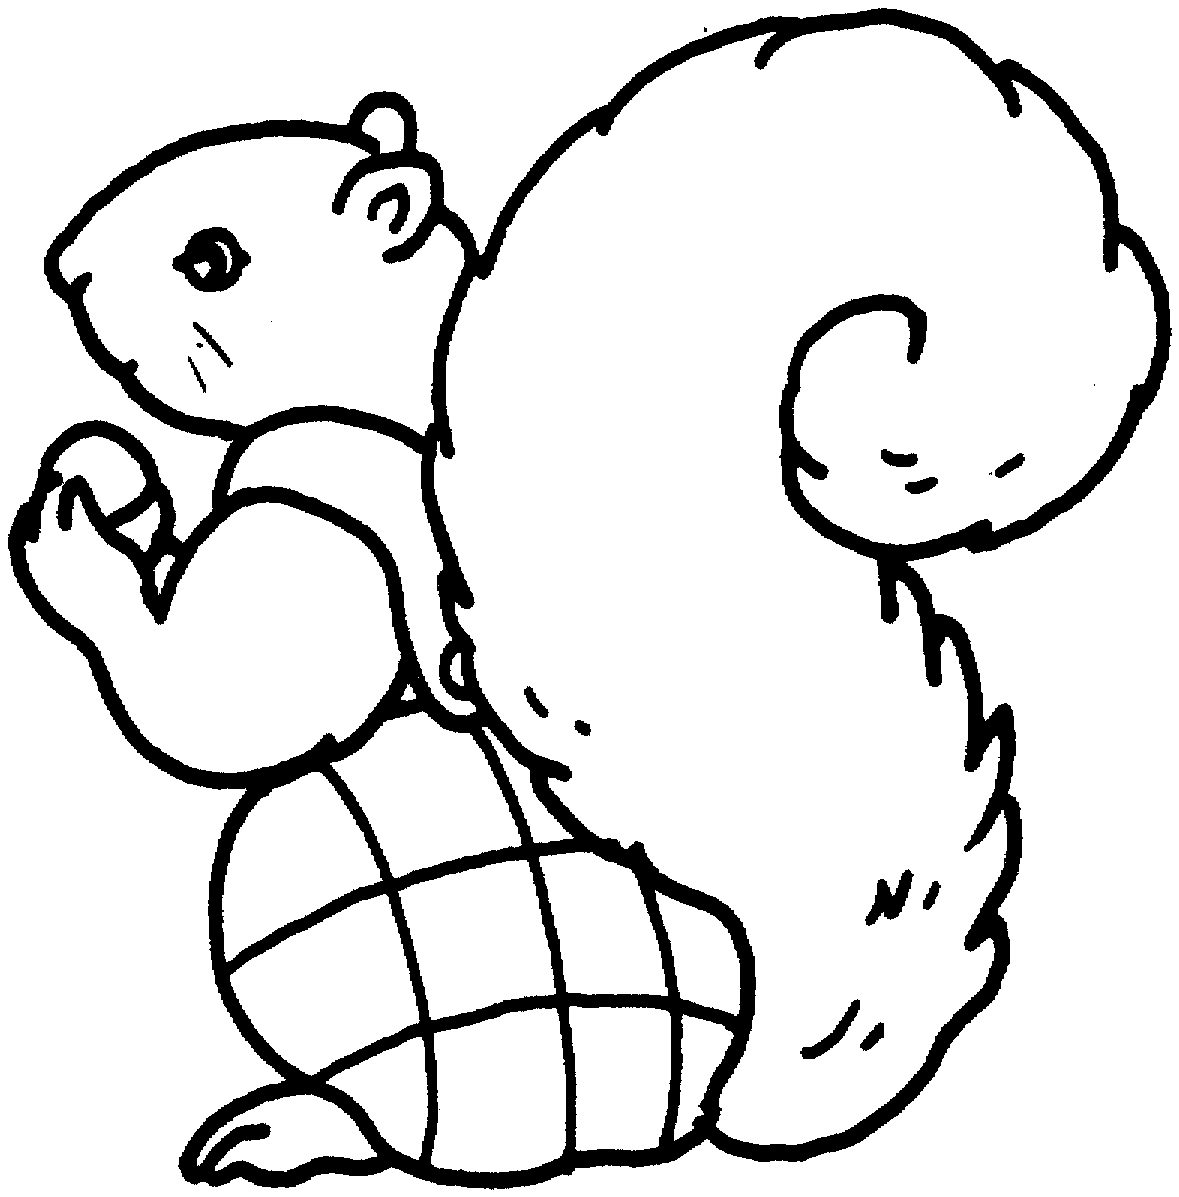 squirrel coloring page redirecting to httpwwwsheknowscomparentingslideshow squirrel page coloring 